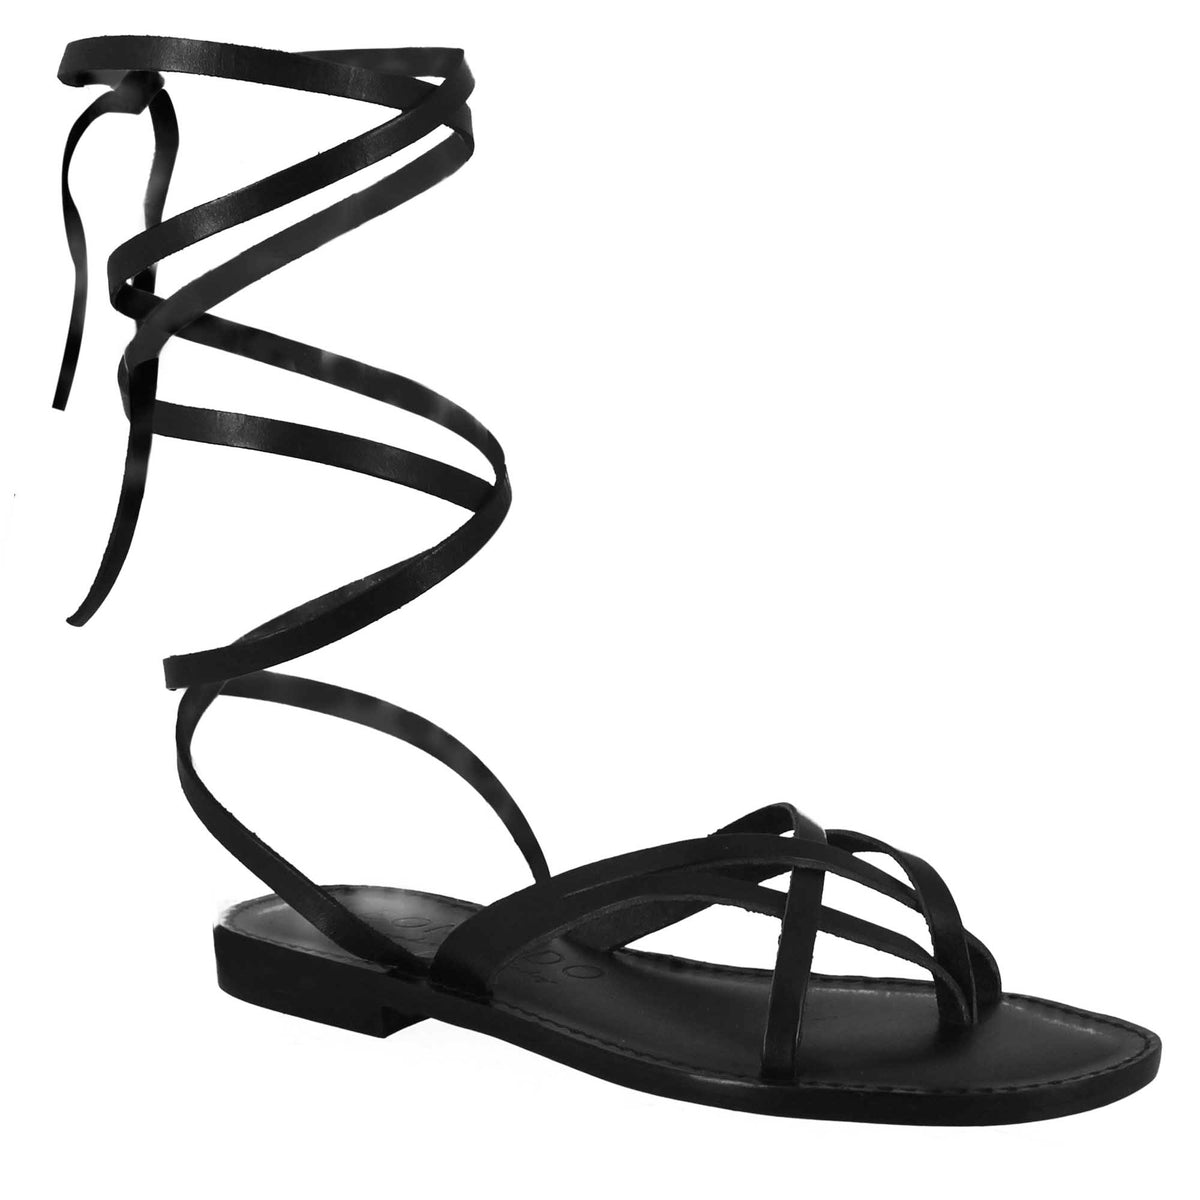 Eclipse sandals for women in ancient Roman style in black leather 